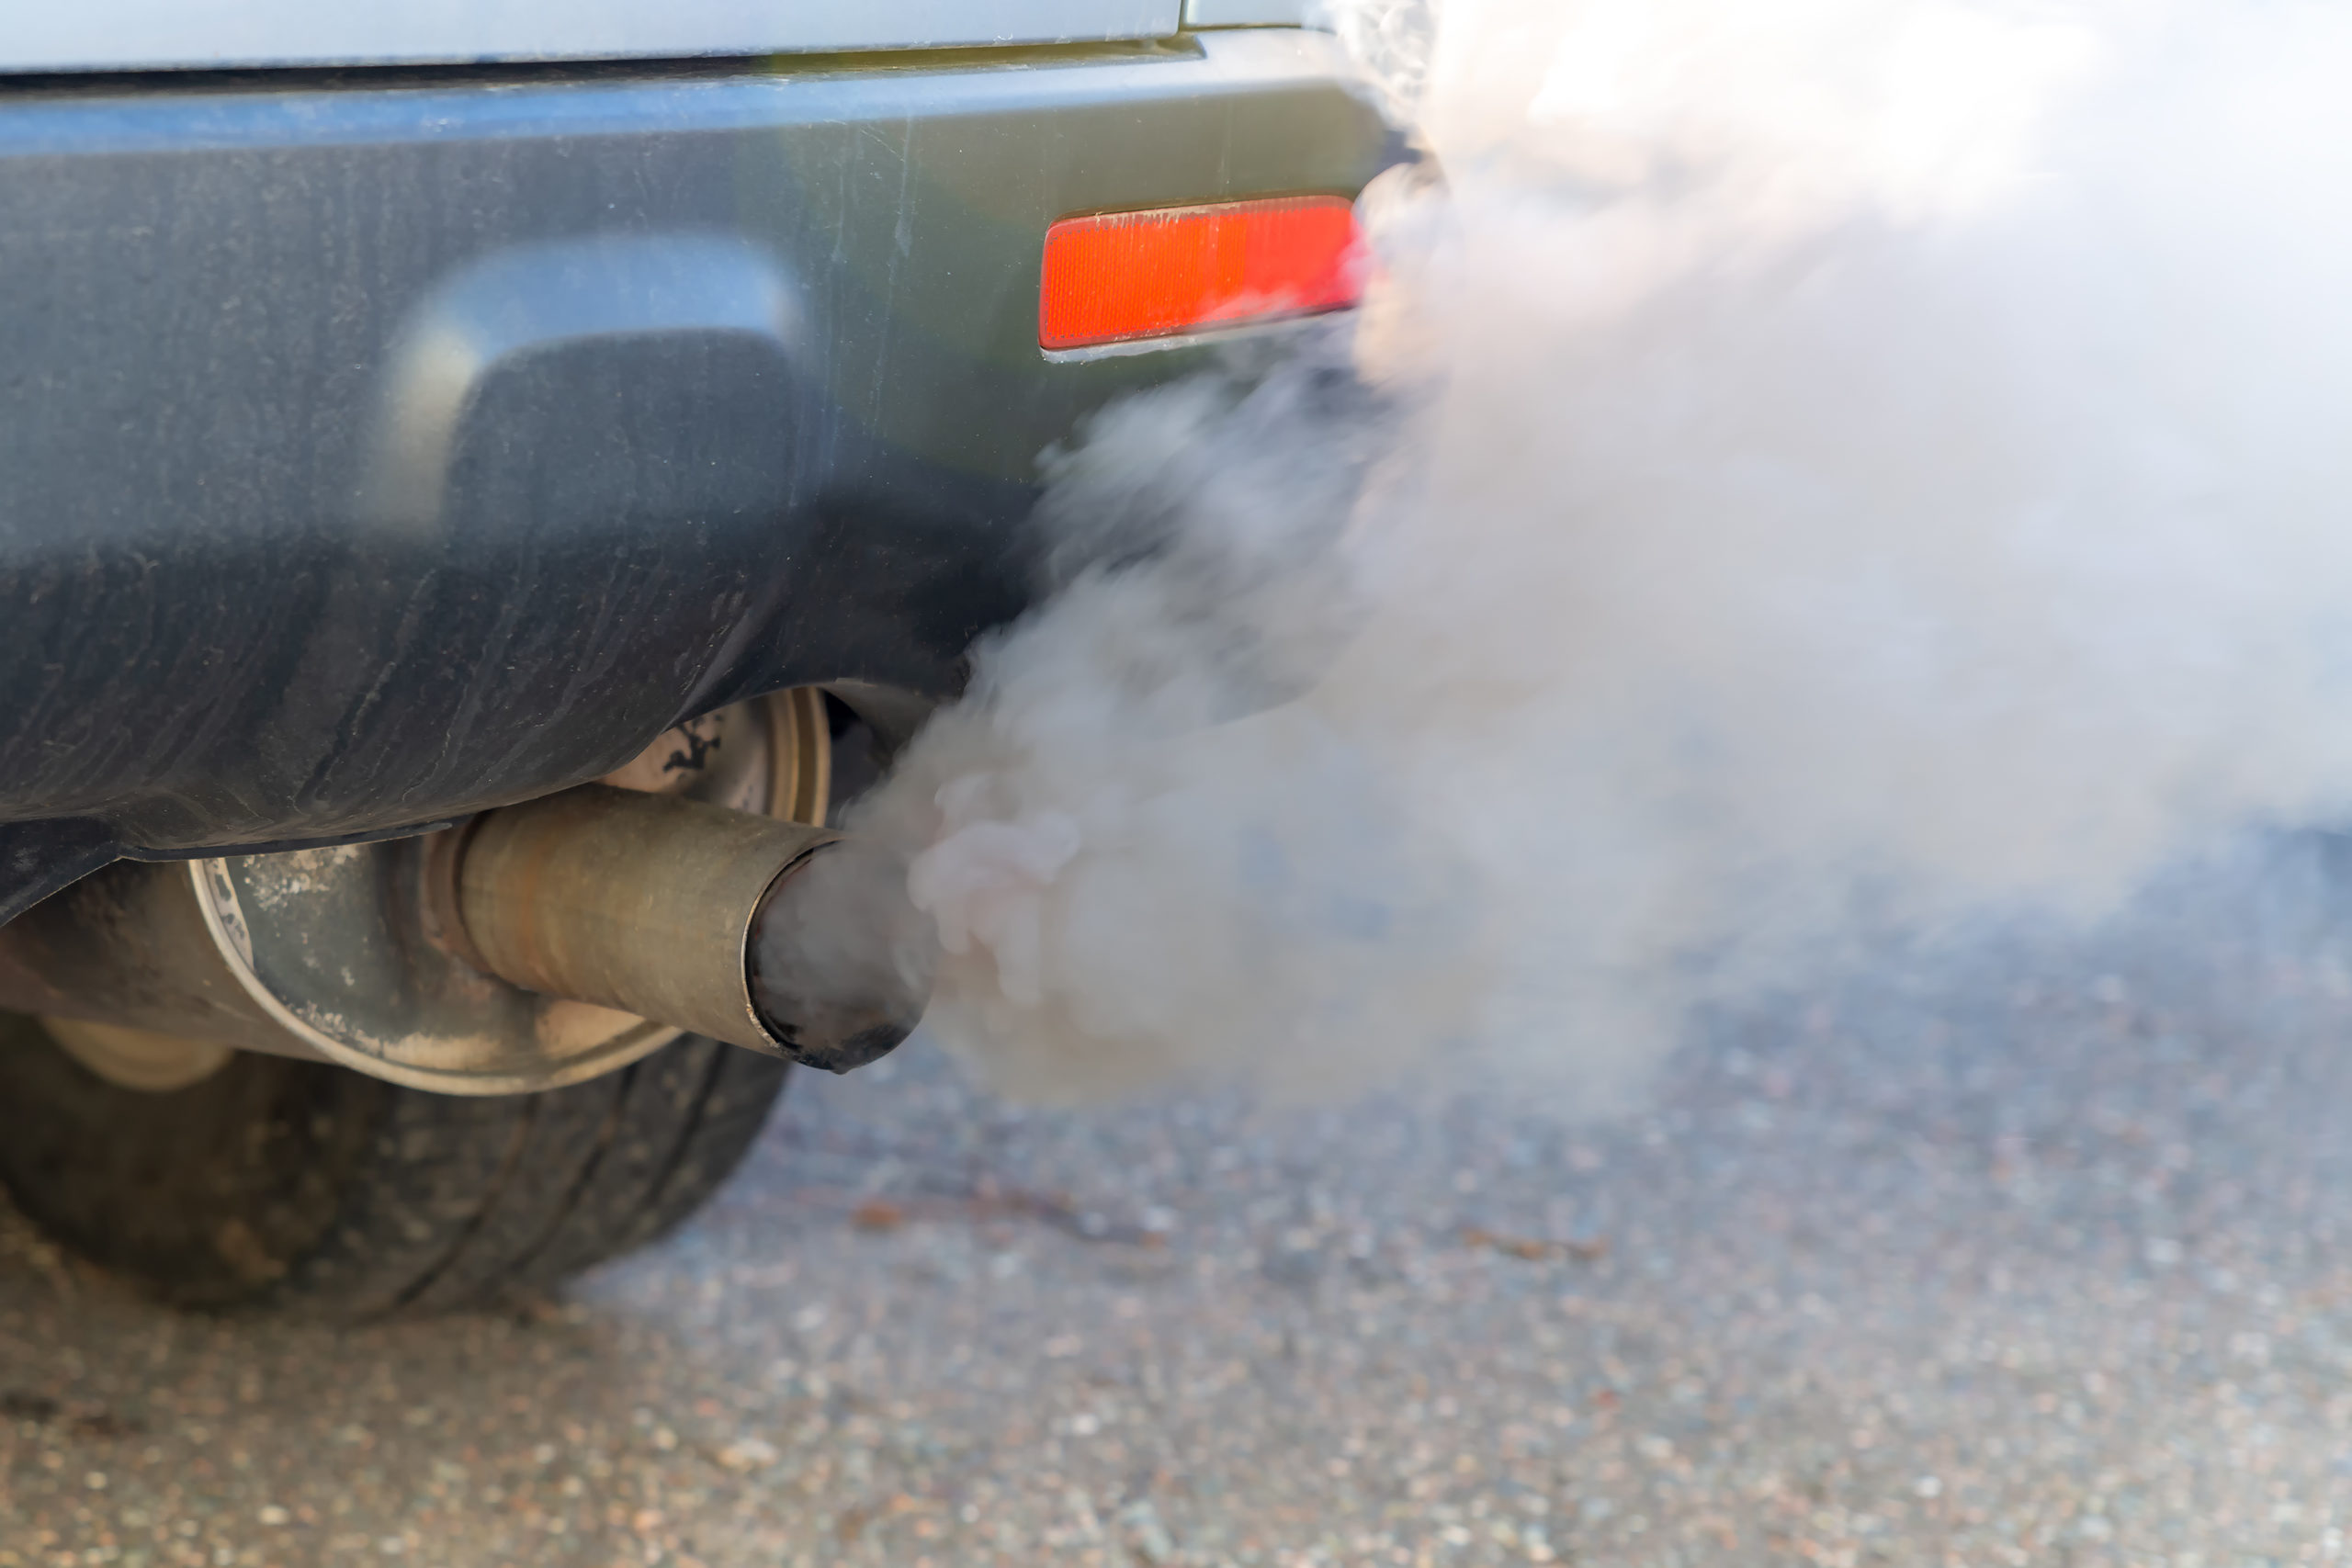 Thick smoke pours from the exhaust pile on a car. Shallow depth of field, focus on the end of the tail pipe. Closeup view.